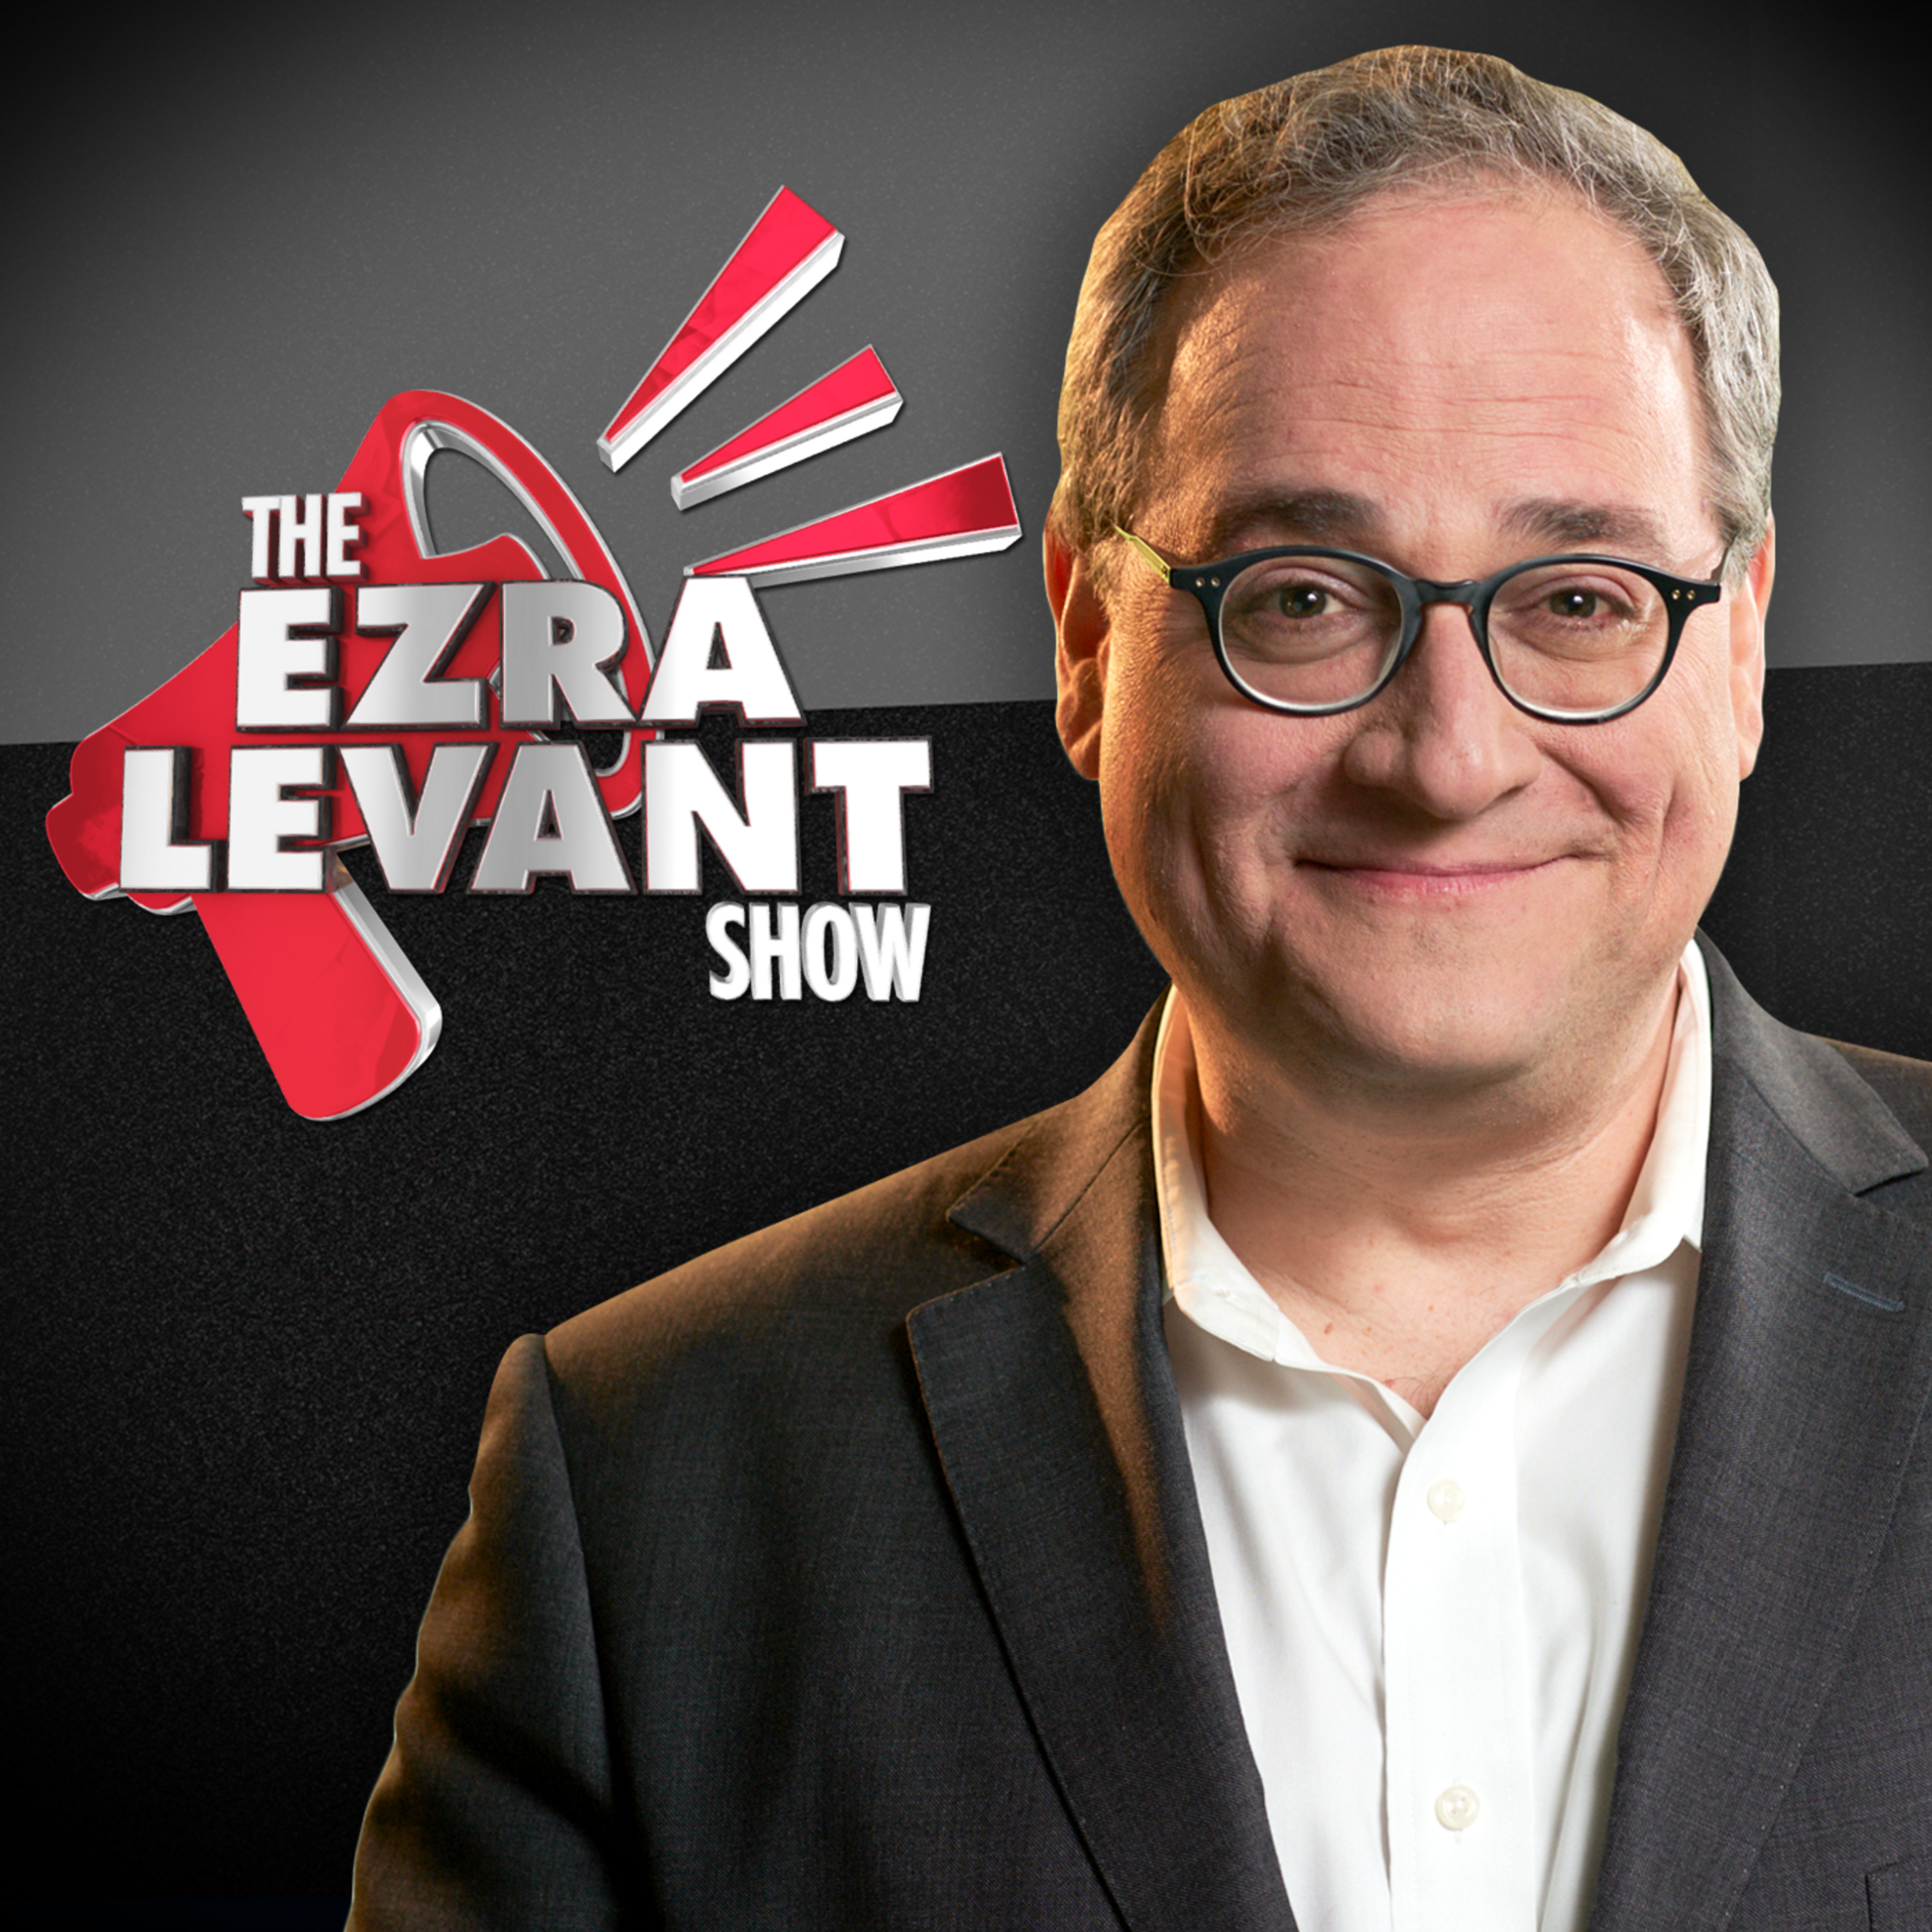 EZRA LEVANT | Liberal pollster says conservatives believe in conspiracy theories — is he right?